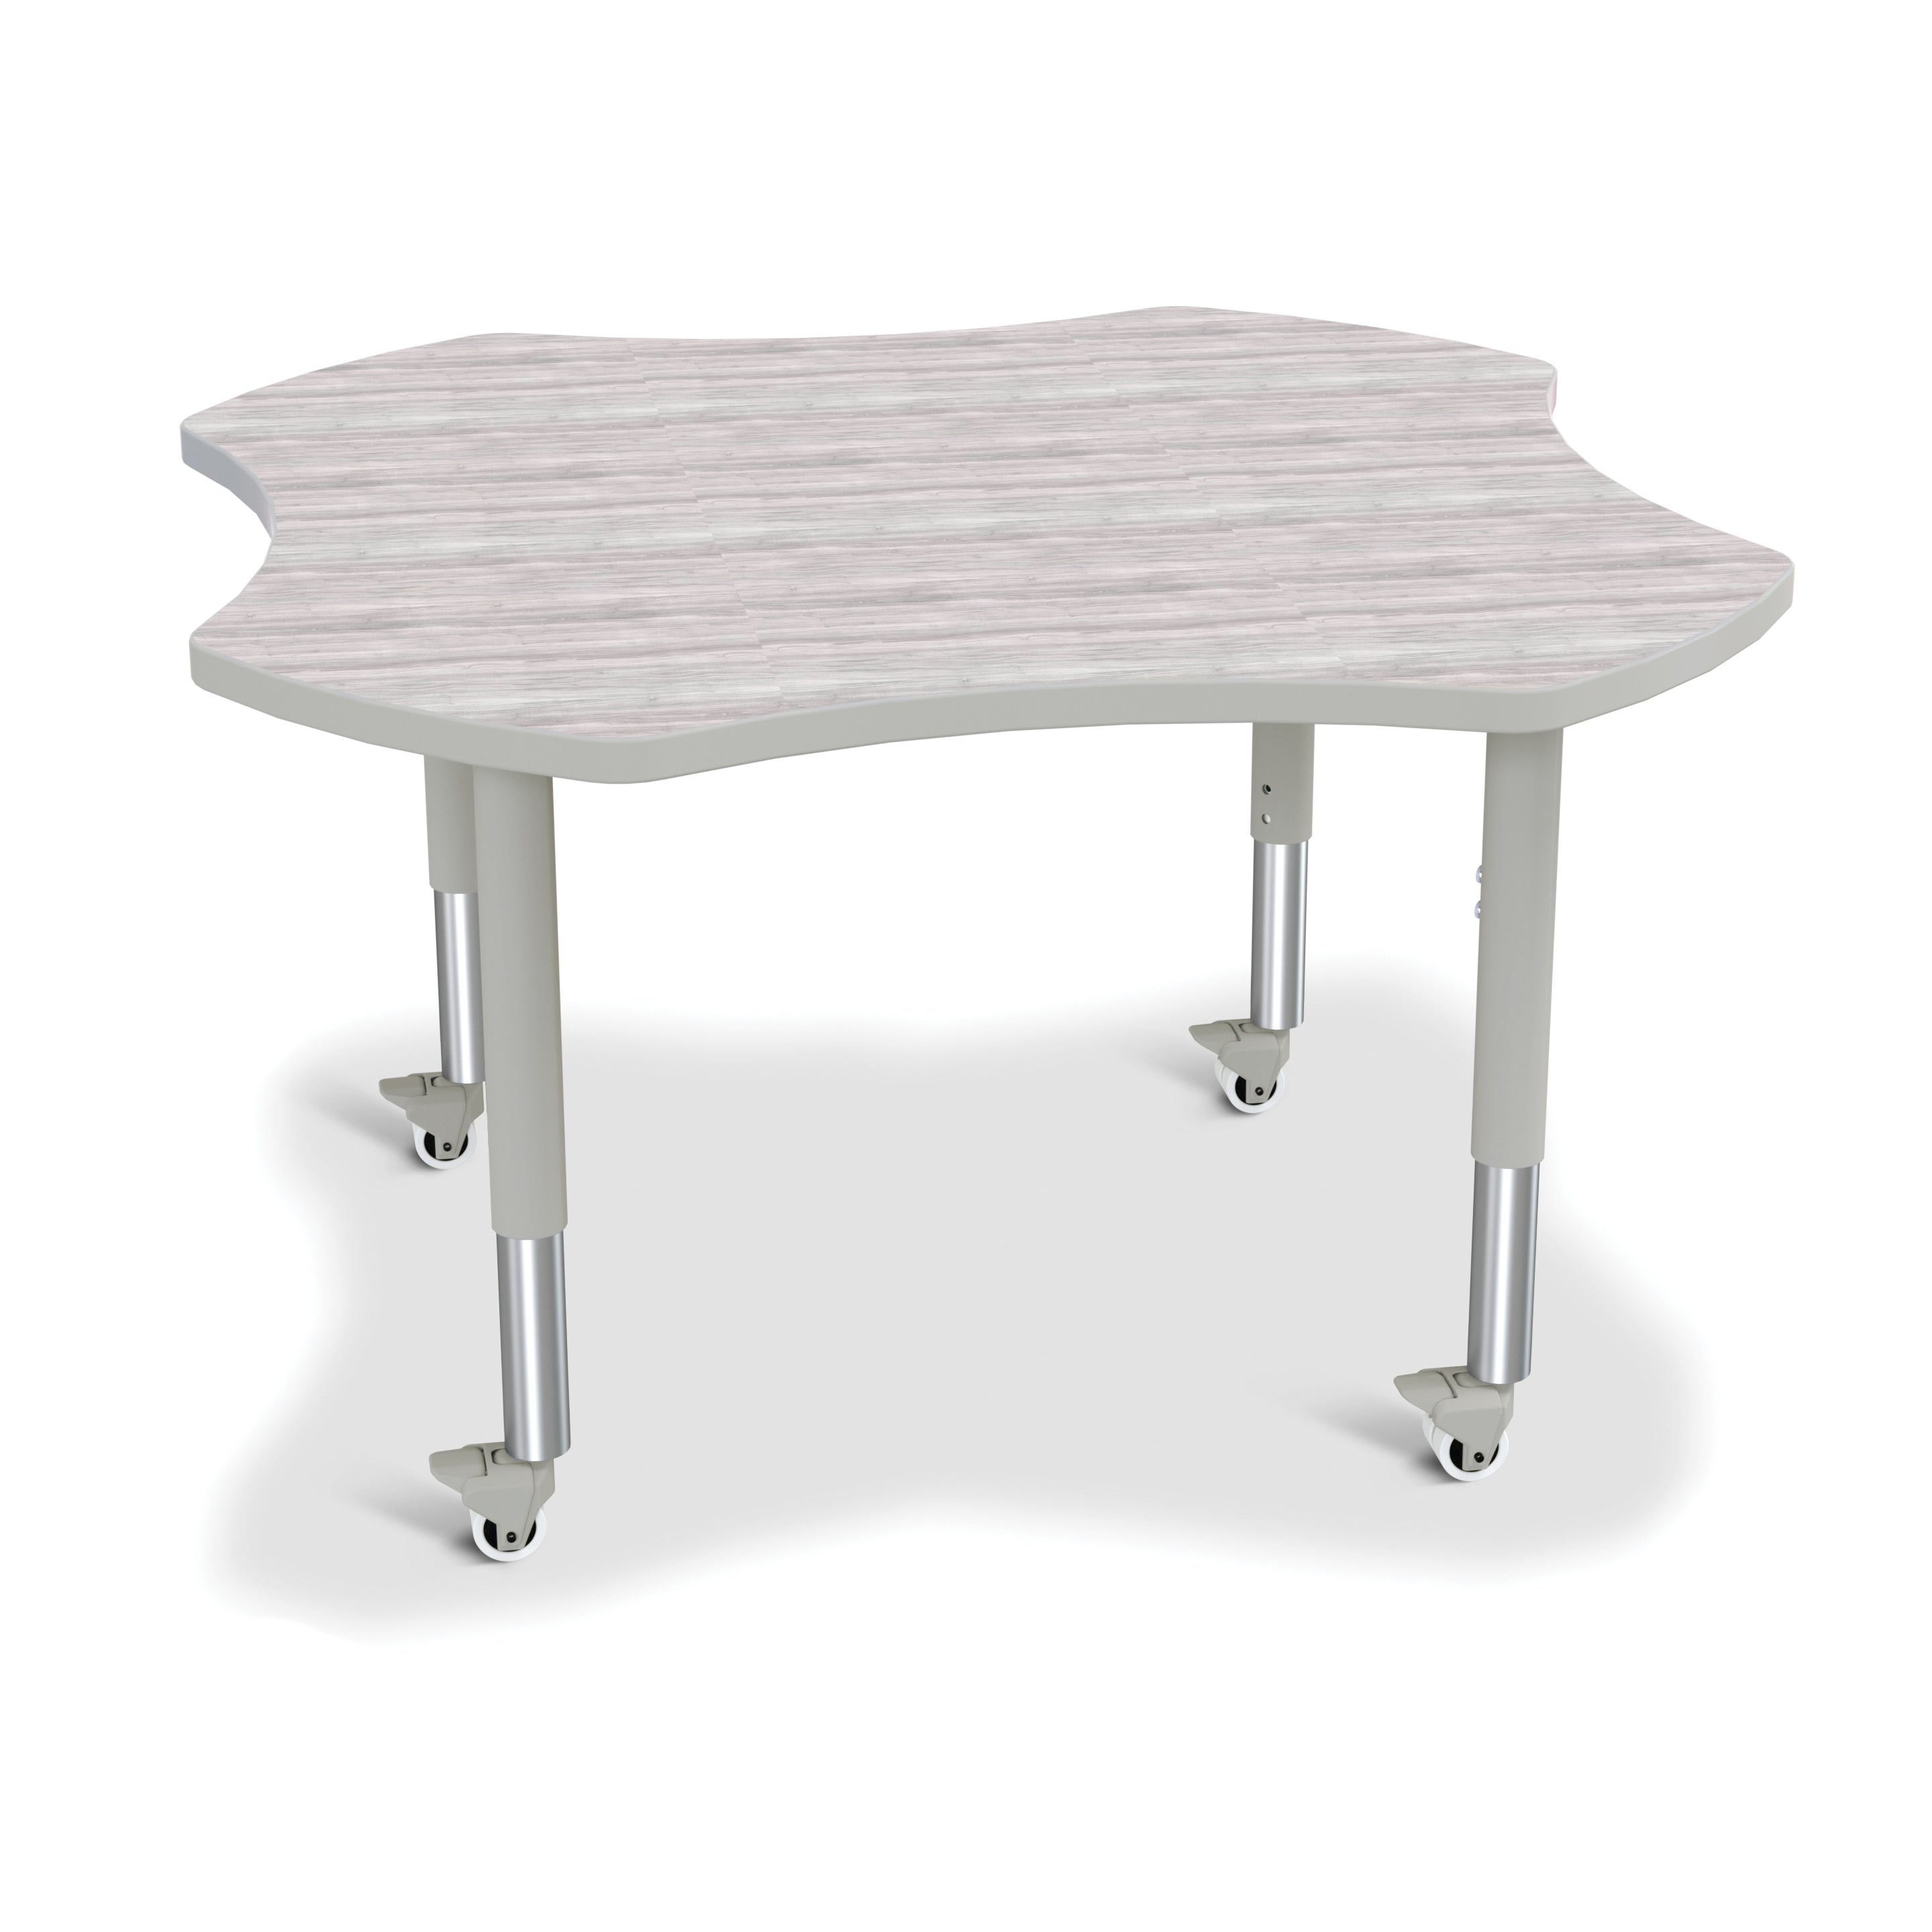 6453JCM450, Berries Four Leaf Activity Table - Mobile - Driftwood Gray/Gray/Gray